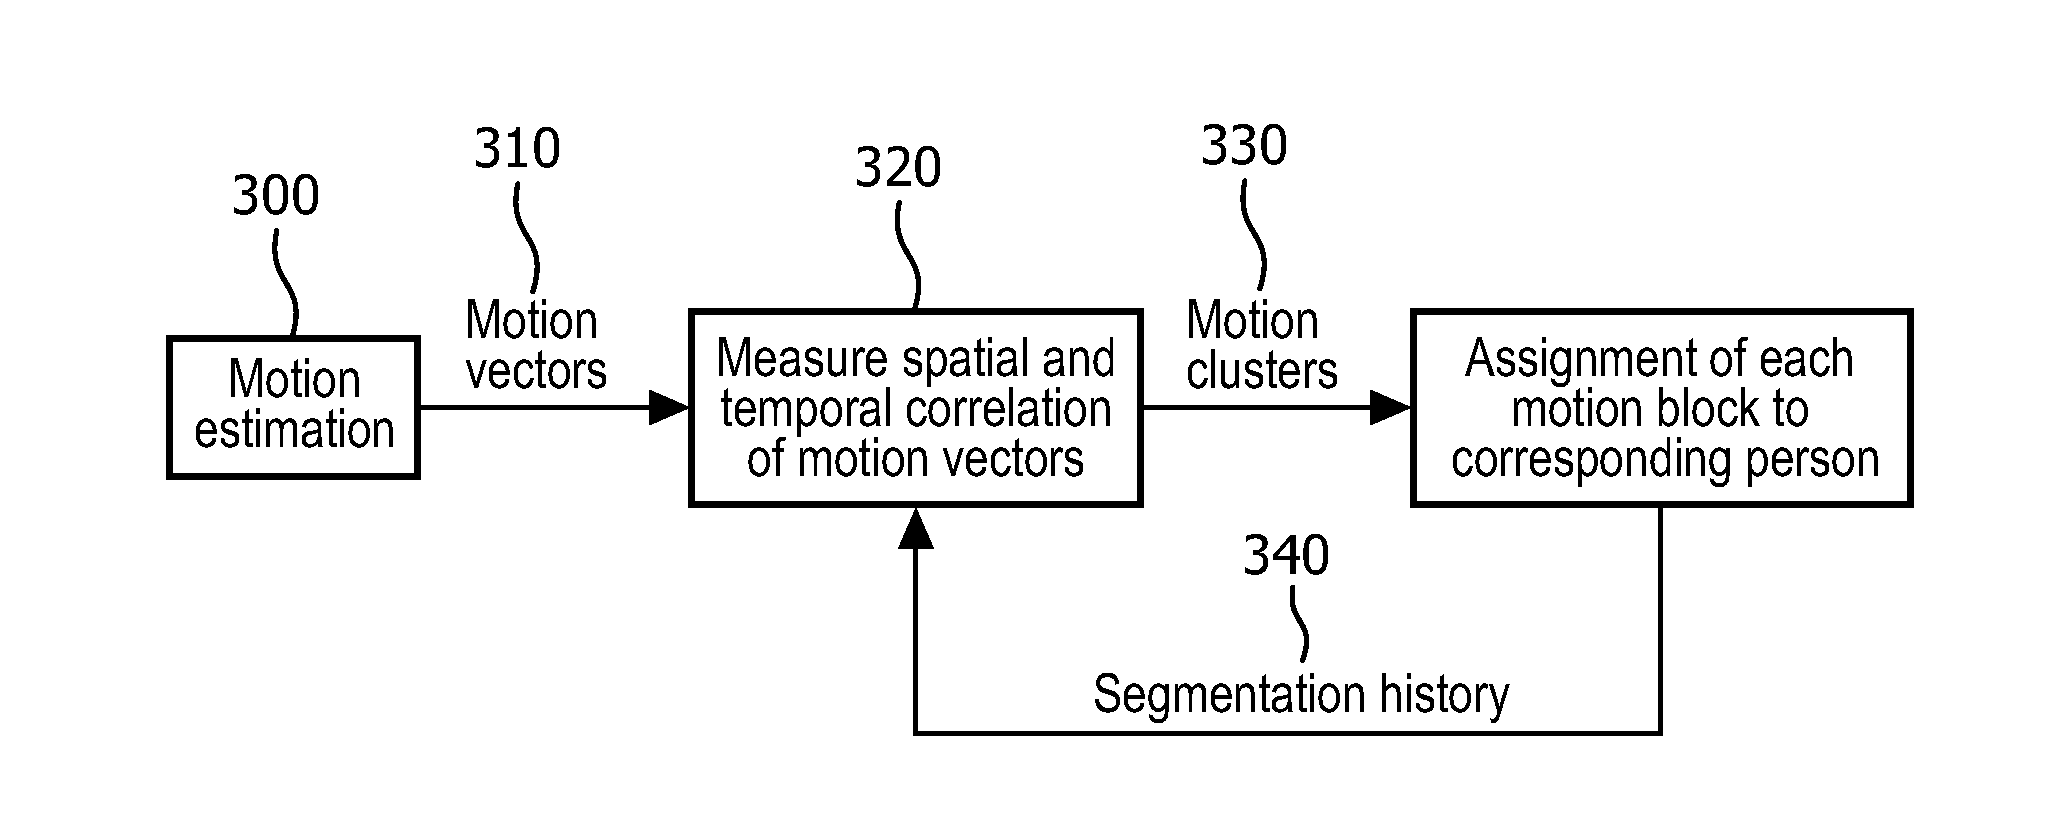 Method and apparatus for monitoring movement and breathing of multiple subjects in a common bed